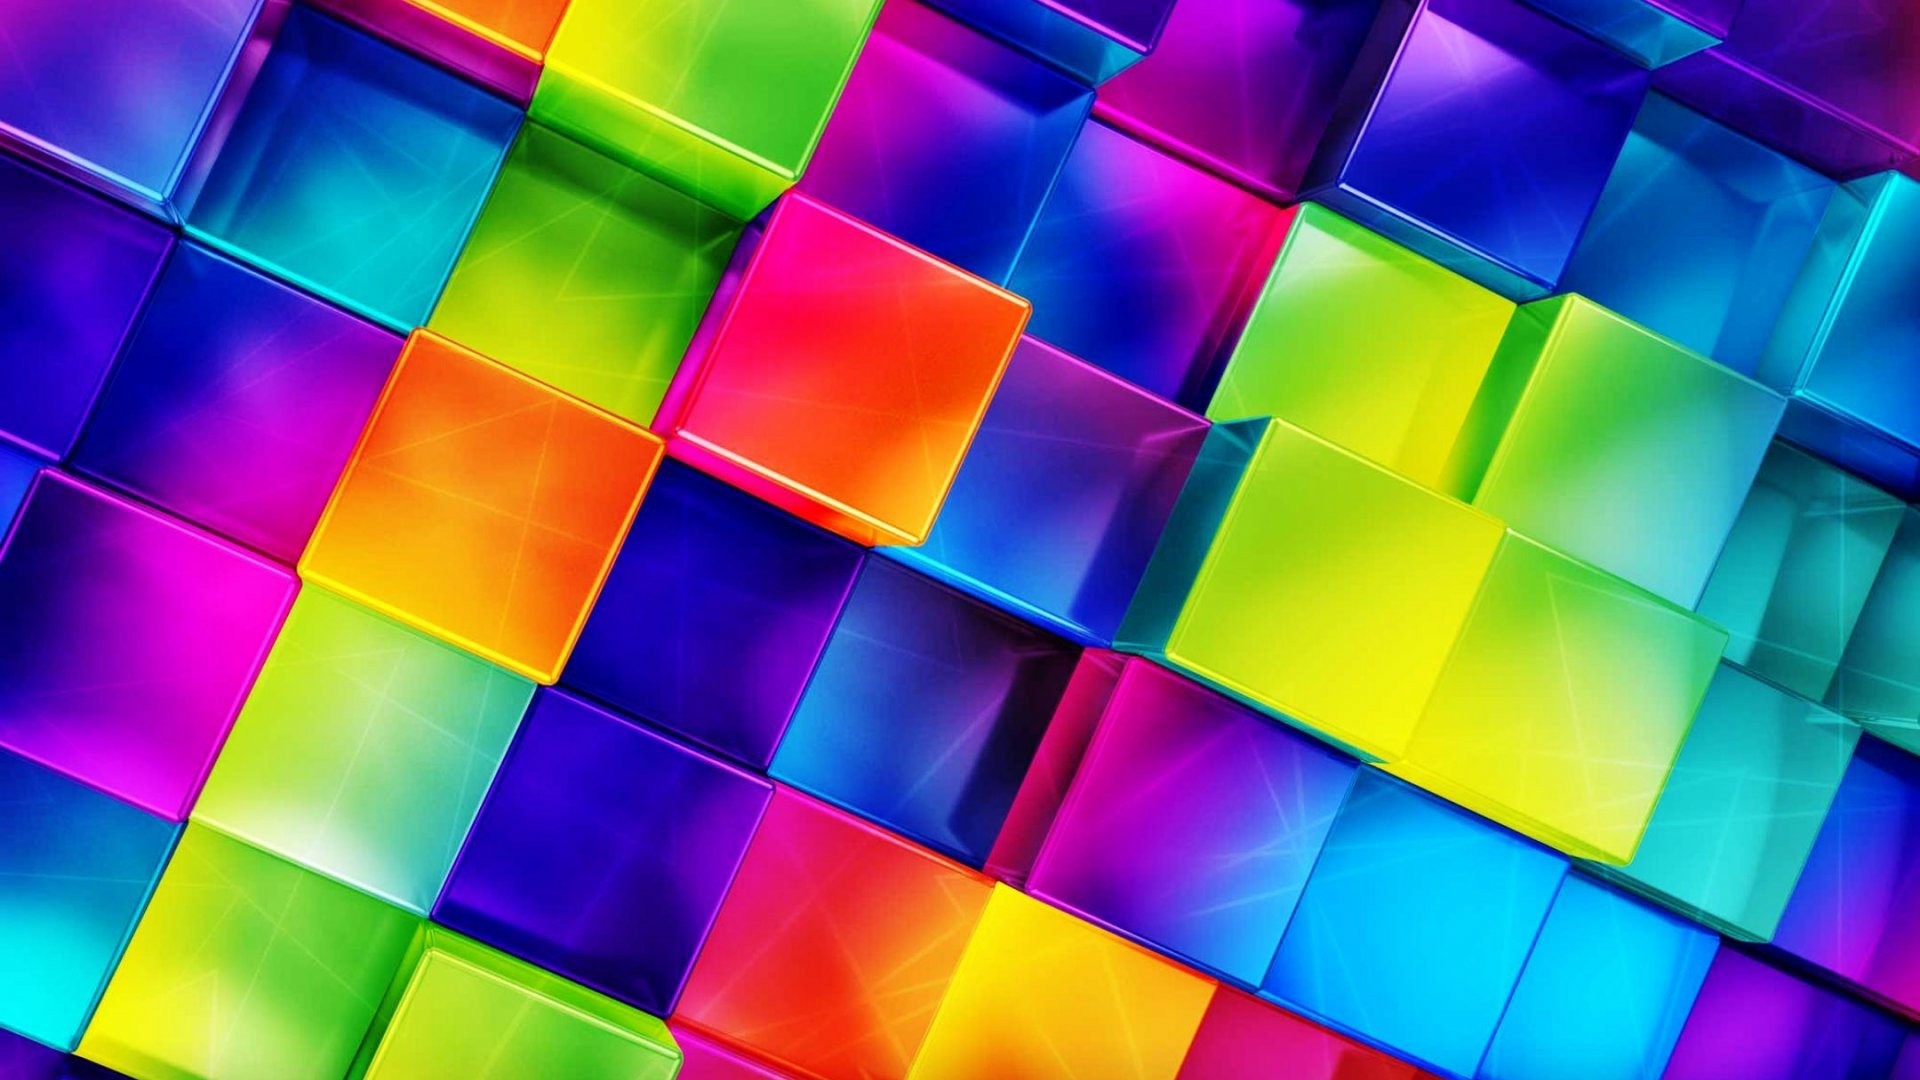 1920x1080 Free abstract cube 3d square colorful bright wallpapers download